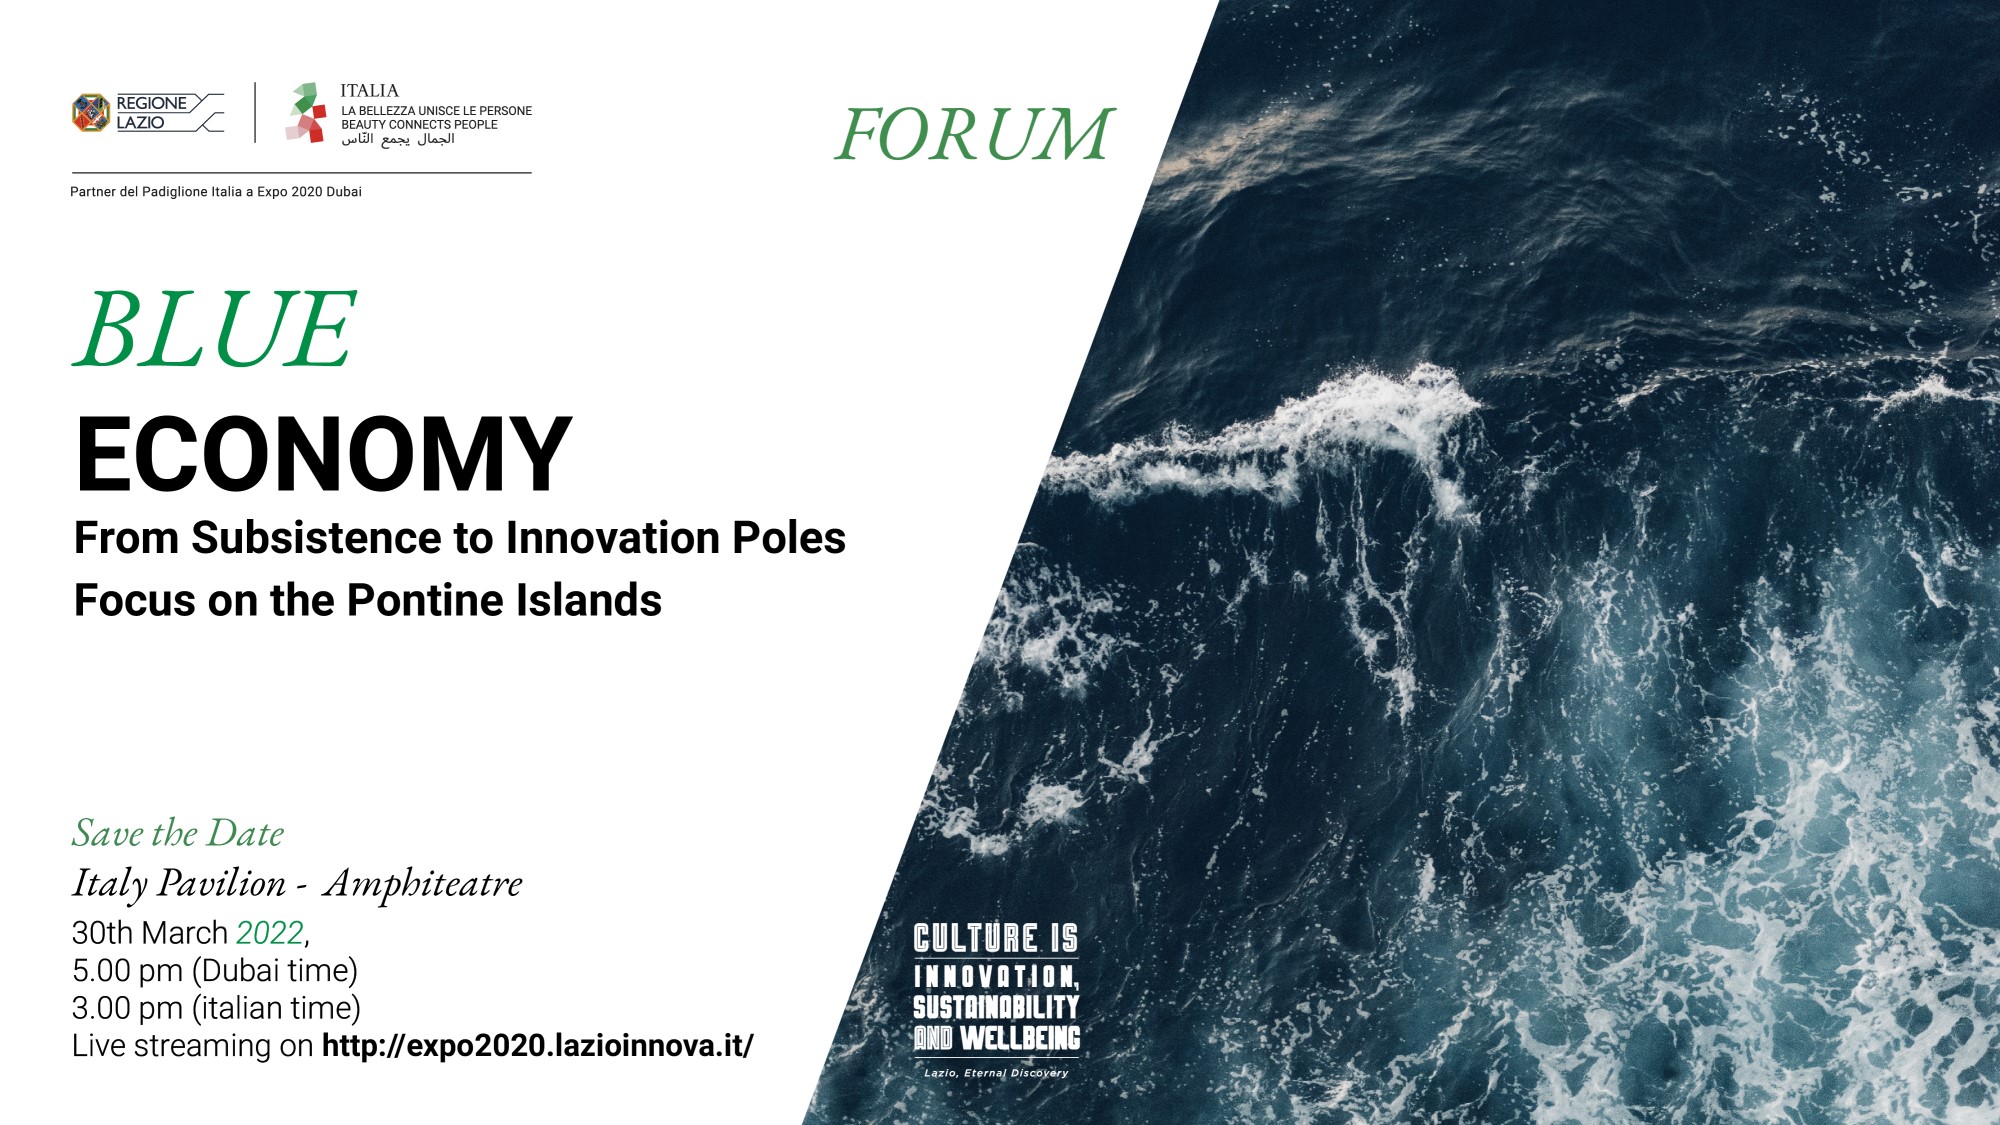 Blue Economy. From Subsistence to Innovation Poles. Focus on the Pontine Islands